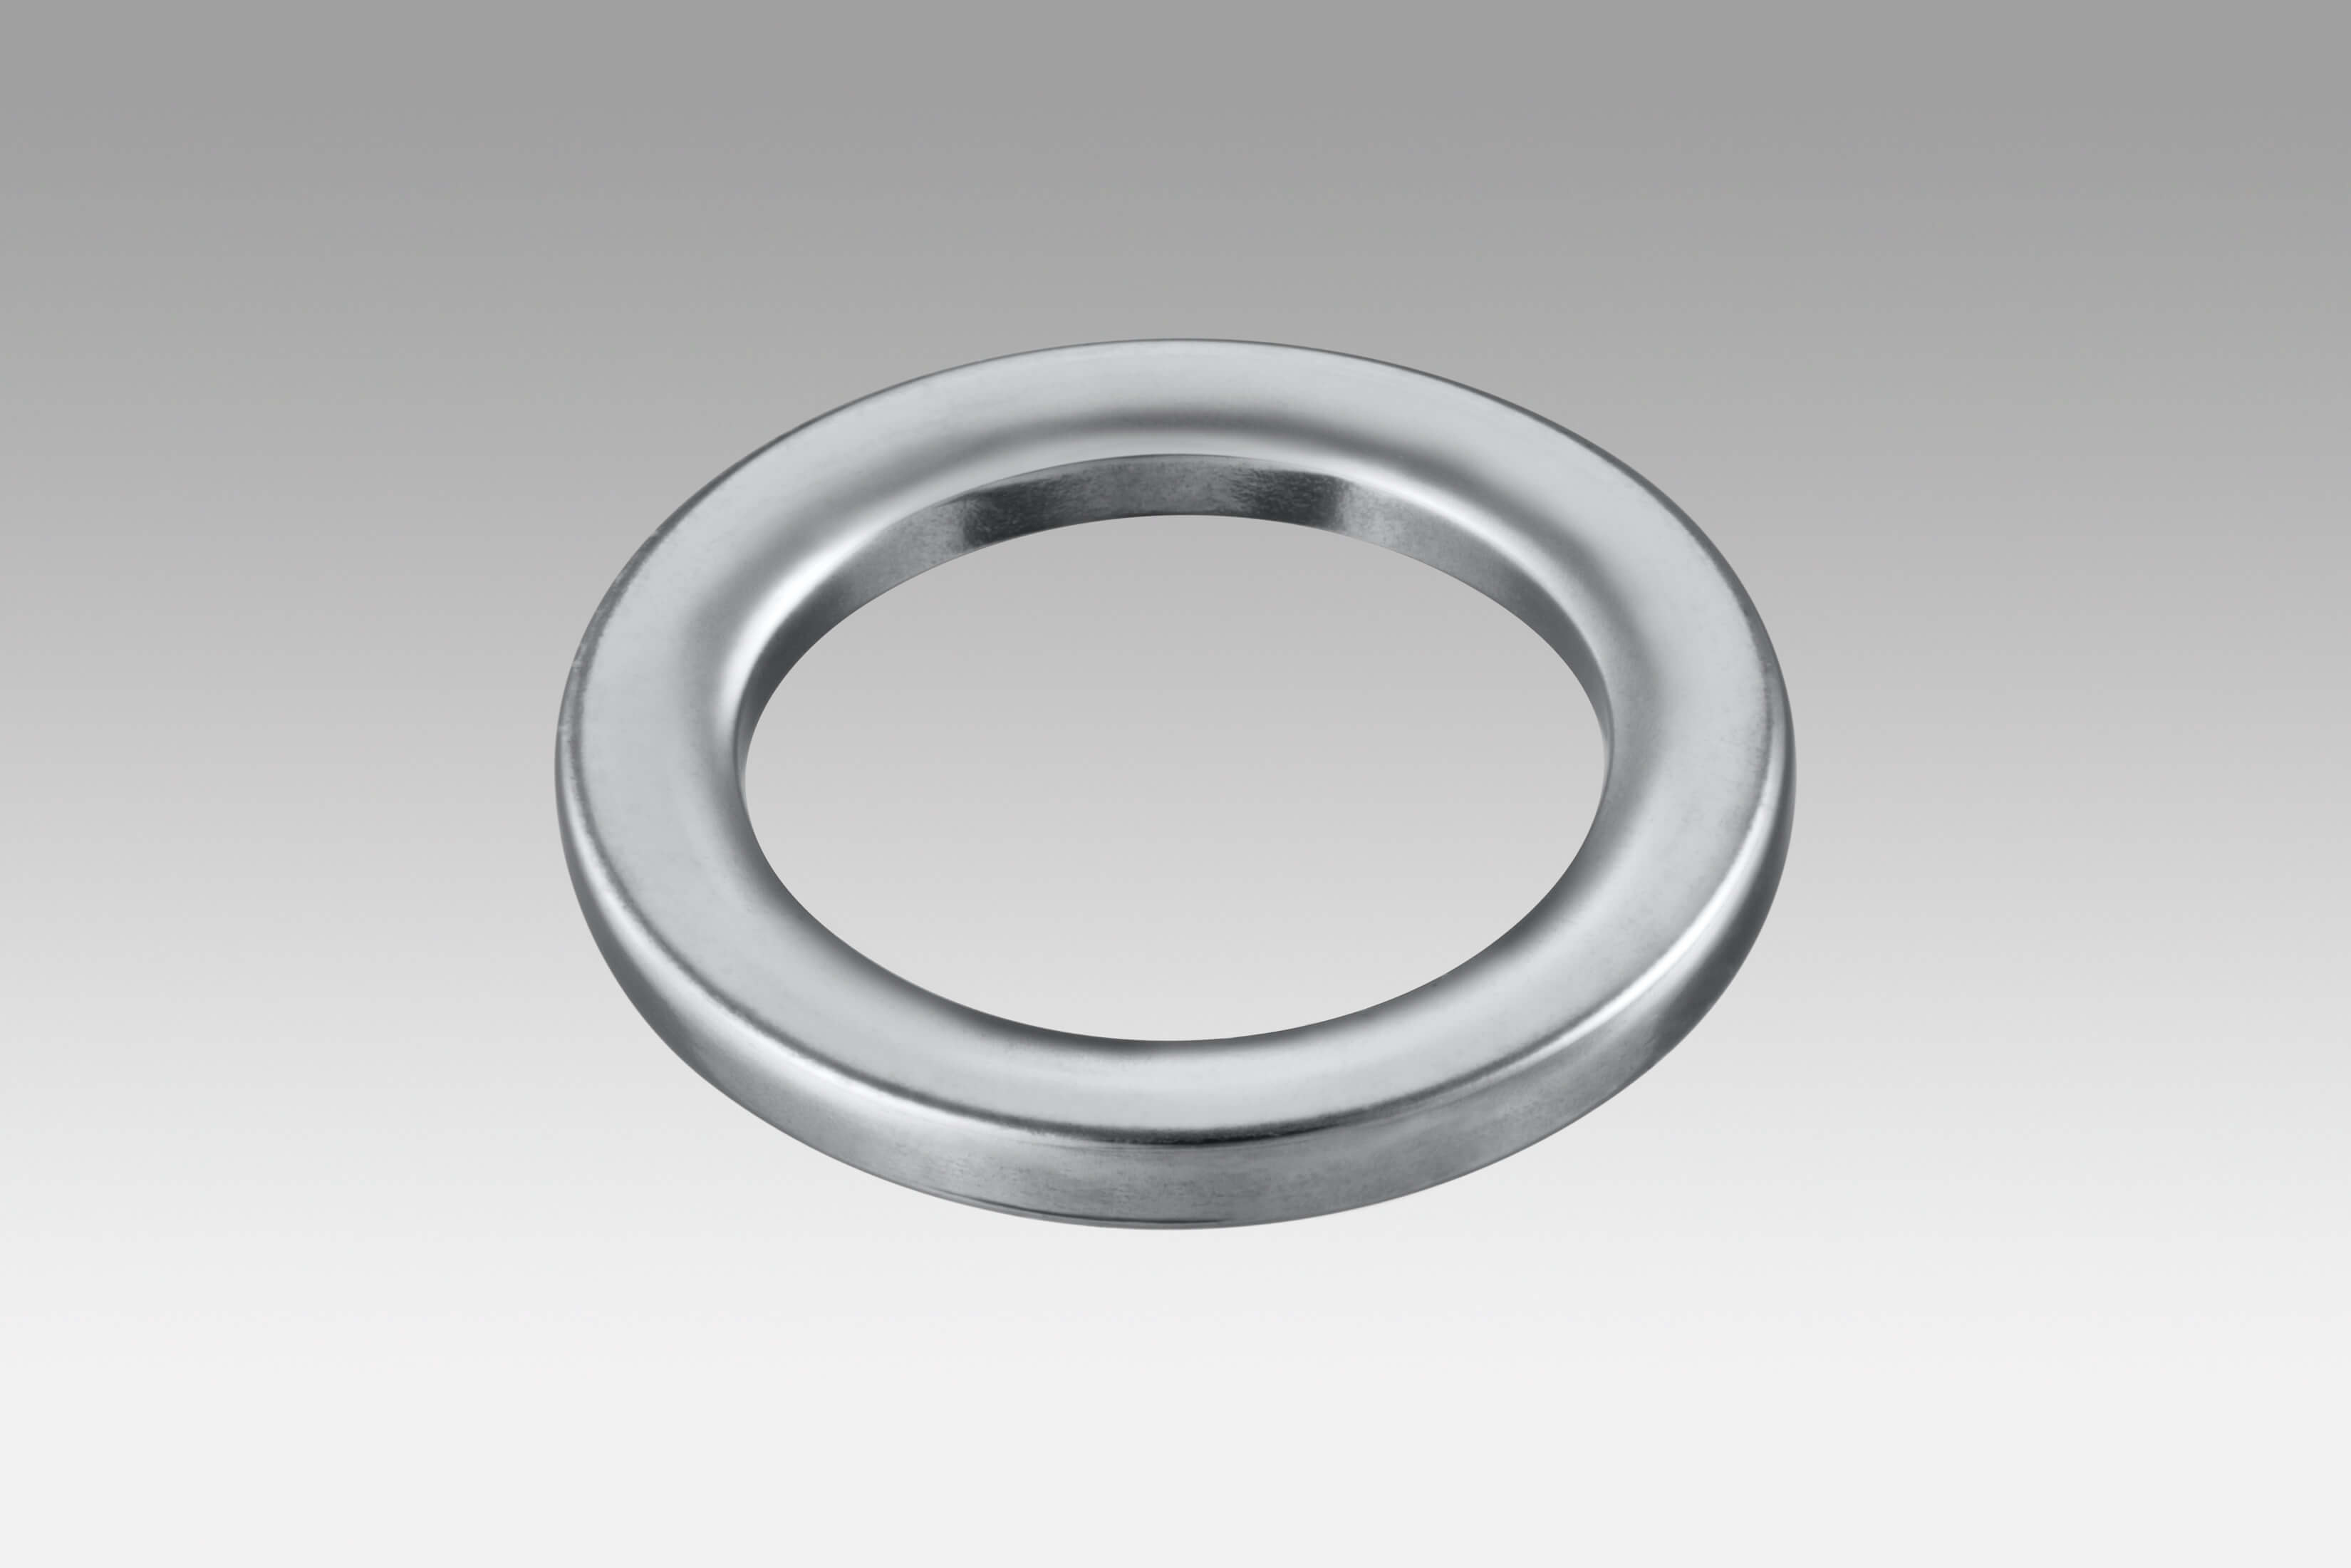 : End piece, ring - Swiss supplier and manufacturer of micro-parts for watchmaking